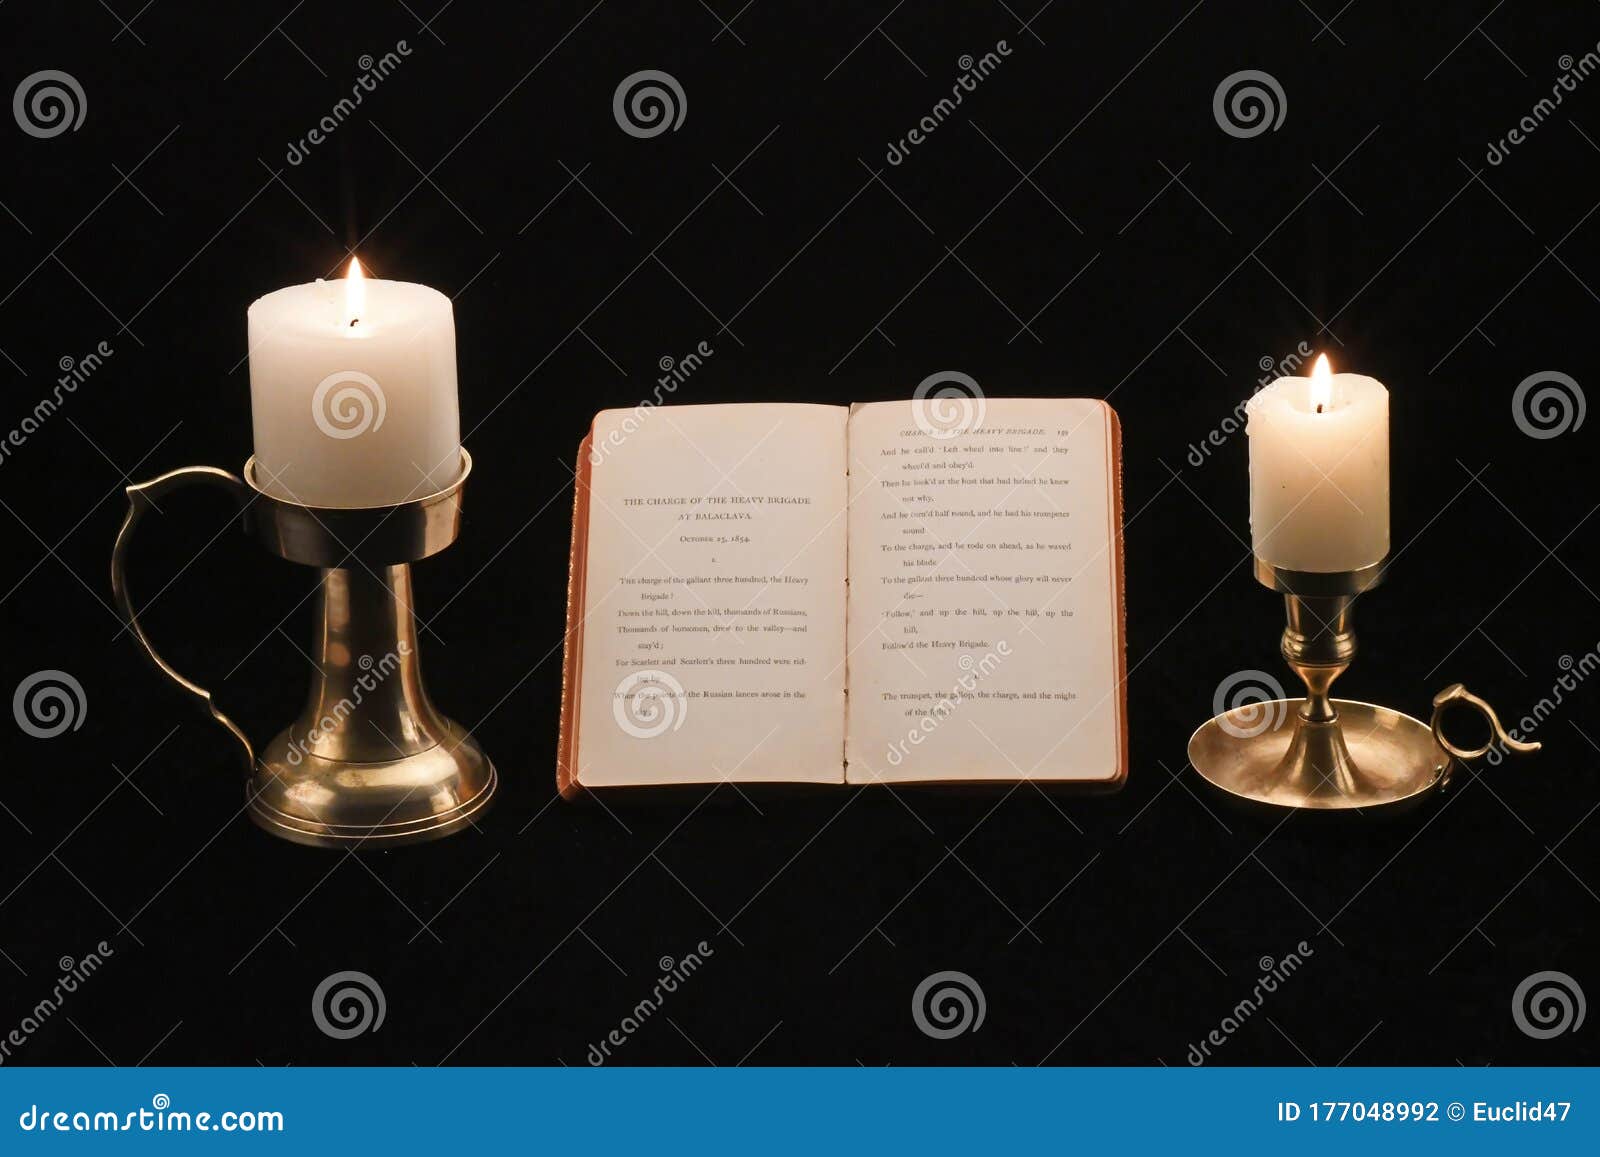 book of poems and candles